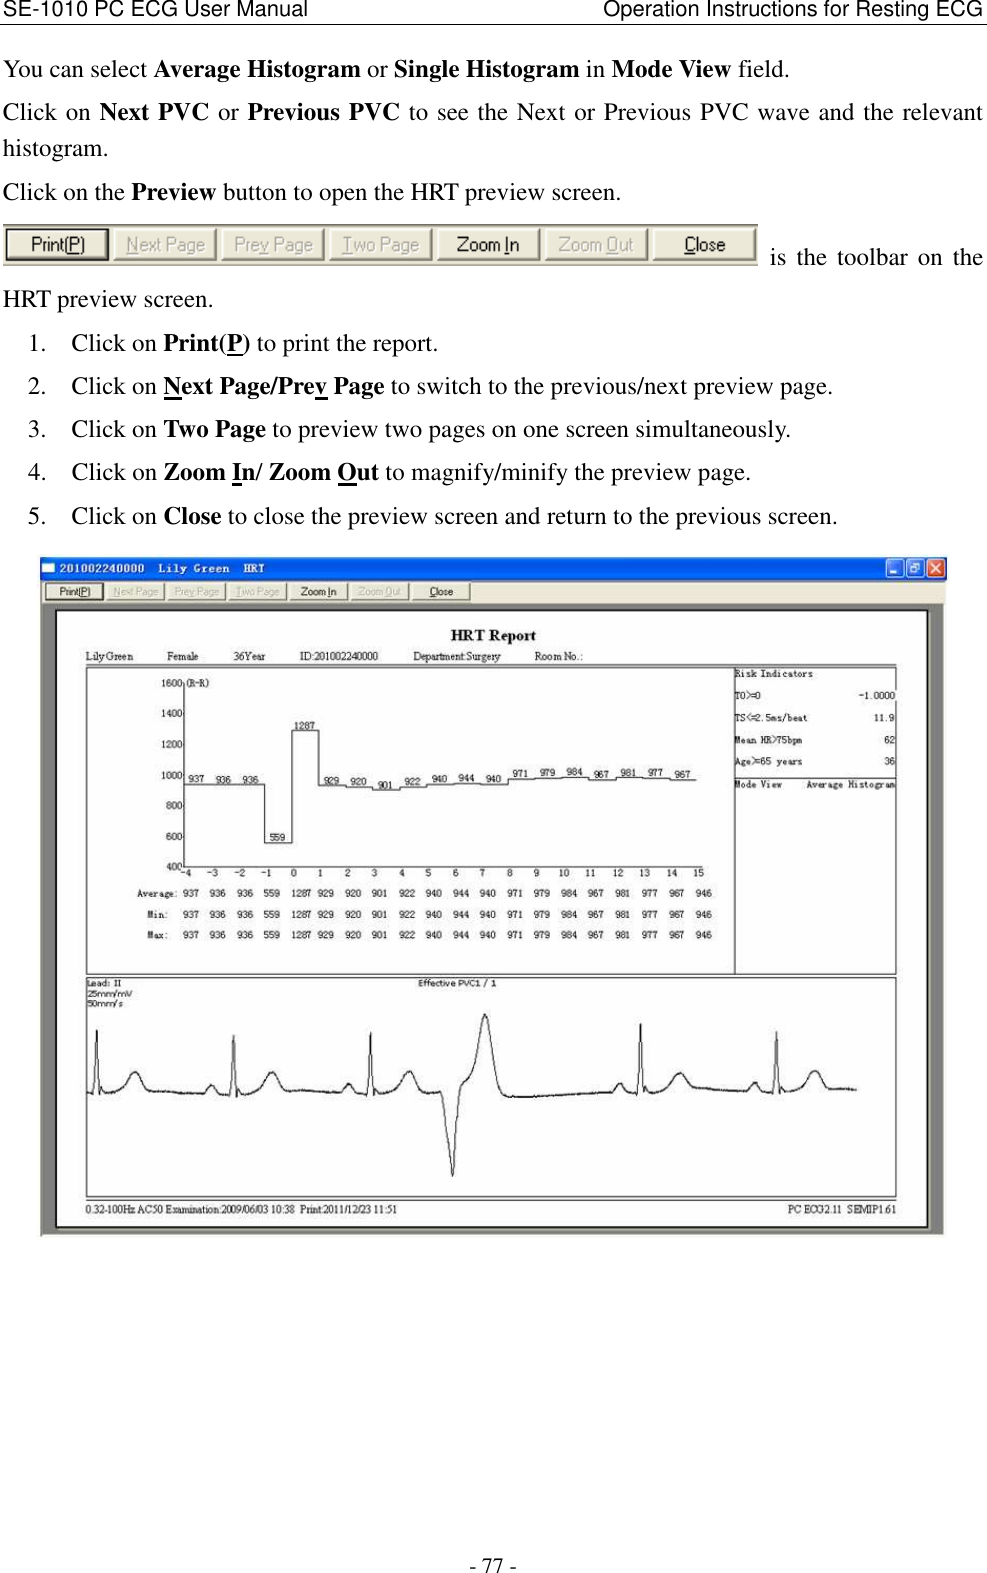 SE-1010 PC ECG User Manual                                                      Operation Instructions for Resting ECG - 77 - You can select Average Histogram or Single Histogram in Mode View field. Click on Next PVC or Previous PVC to see the Next or Previous PVC wave and the relevant histogram. Click on the Preview button to open the HRT preview screen.   is  the  toolbar  on  the HRT preview screen. 1. Click on Print(P) to print the report. 2. Click on Next Page/Prev Page to switch to the previous/next preview page. 3. Click on Two Page to preview two pages on one screen simultaneously. 4. Click on Zoom In/ Zoom Out to magnify/minify the preview page. 5. Click on Close to close the preview screen and return to the previous screen.  